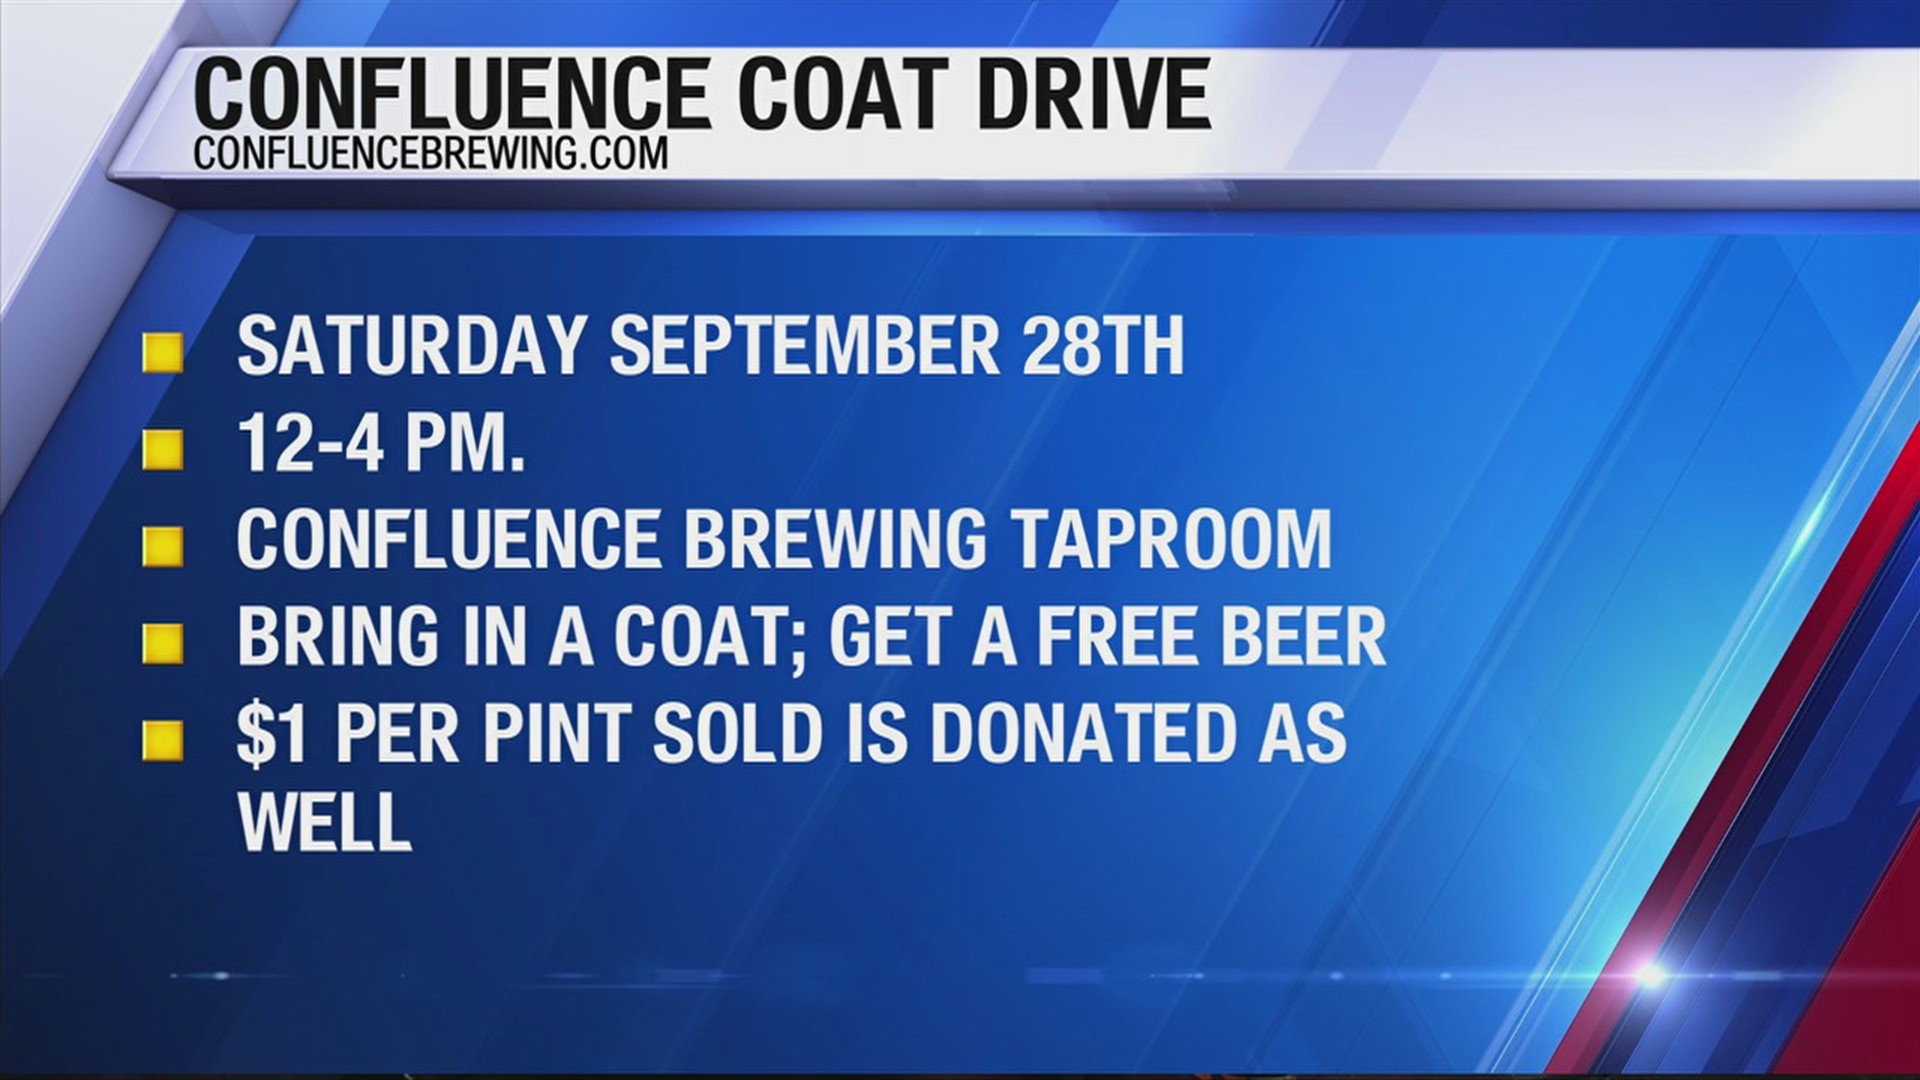 The colder months are approaching and this weekend, you can help students stay warm all winter long by participating in Confluence Brewing Company's coat drive.